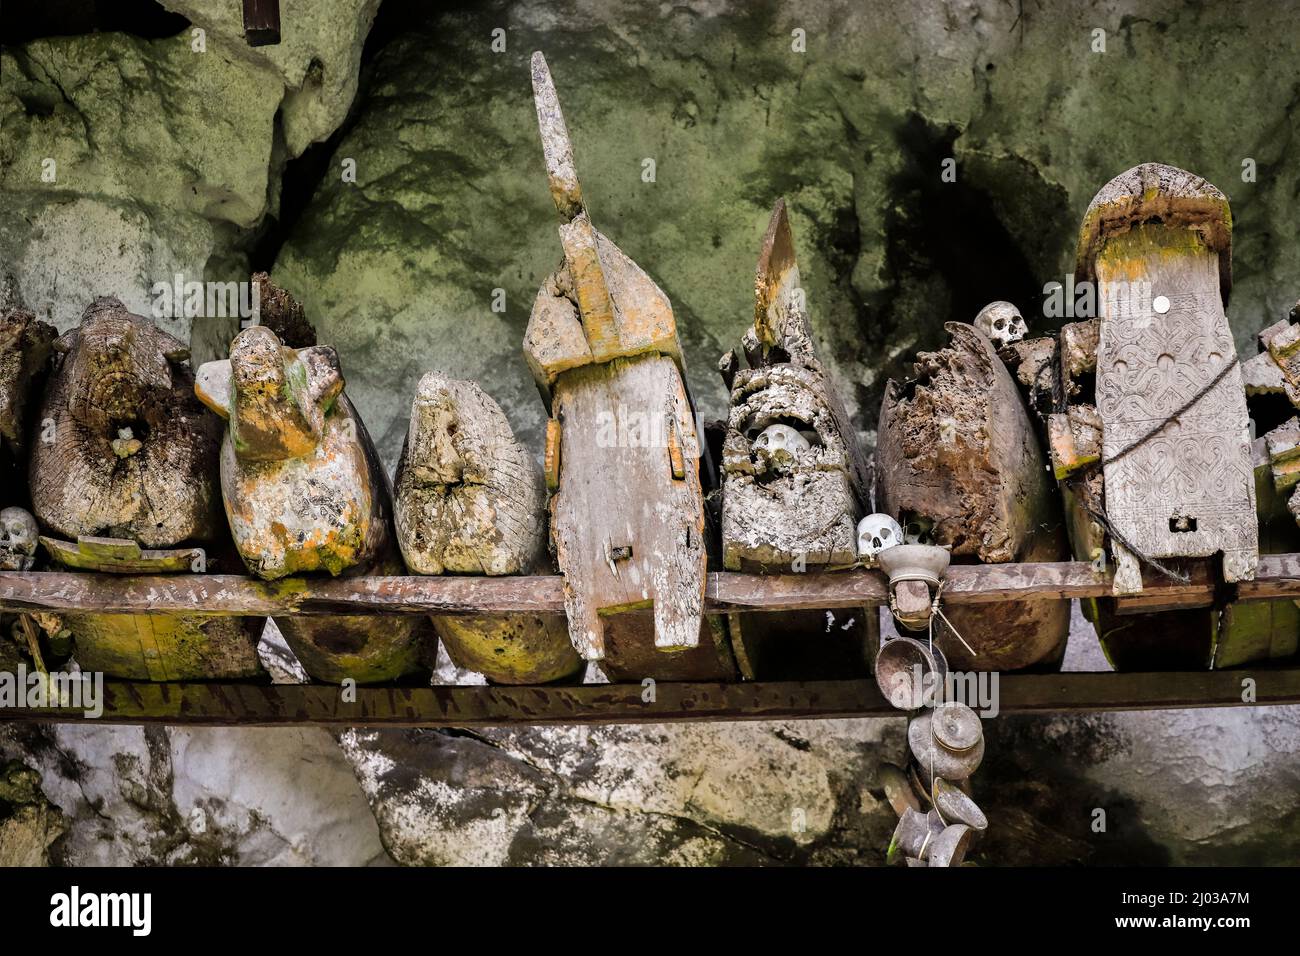 Coffins hung high up for more status at Londa caves, south of Rantepao city, Londa, Rantepao, Toraja, South Sulawesi, Indonesia, Southeast Asia, Asia Stock Photo